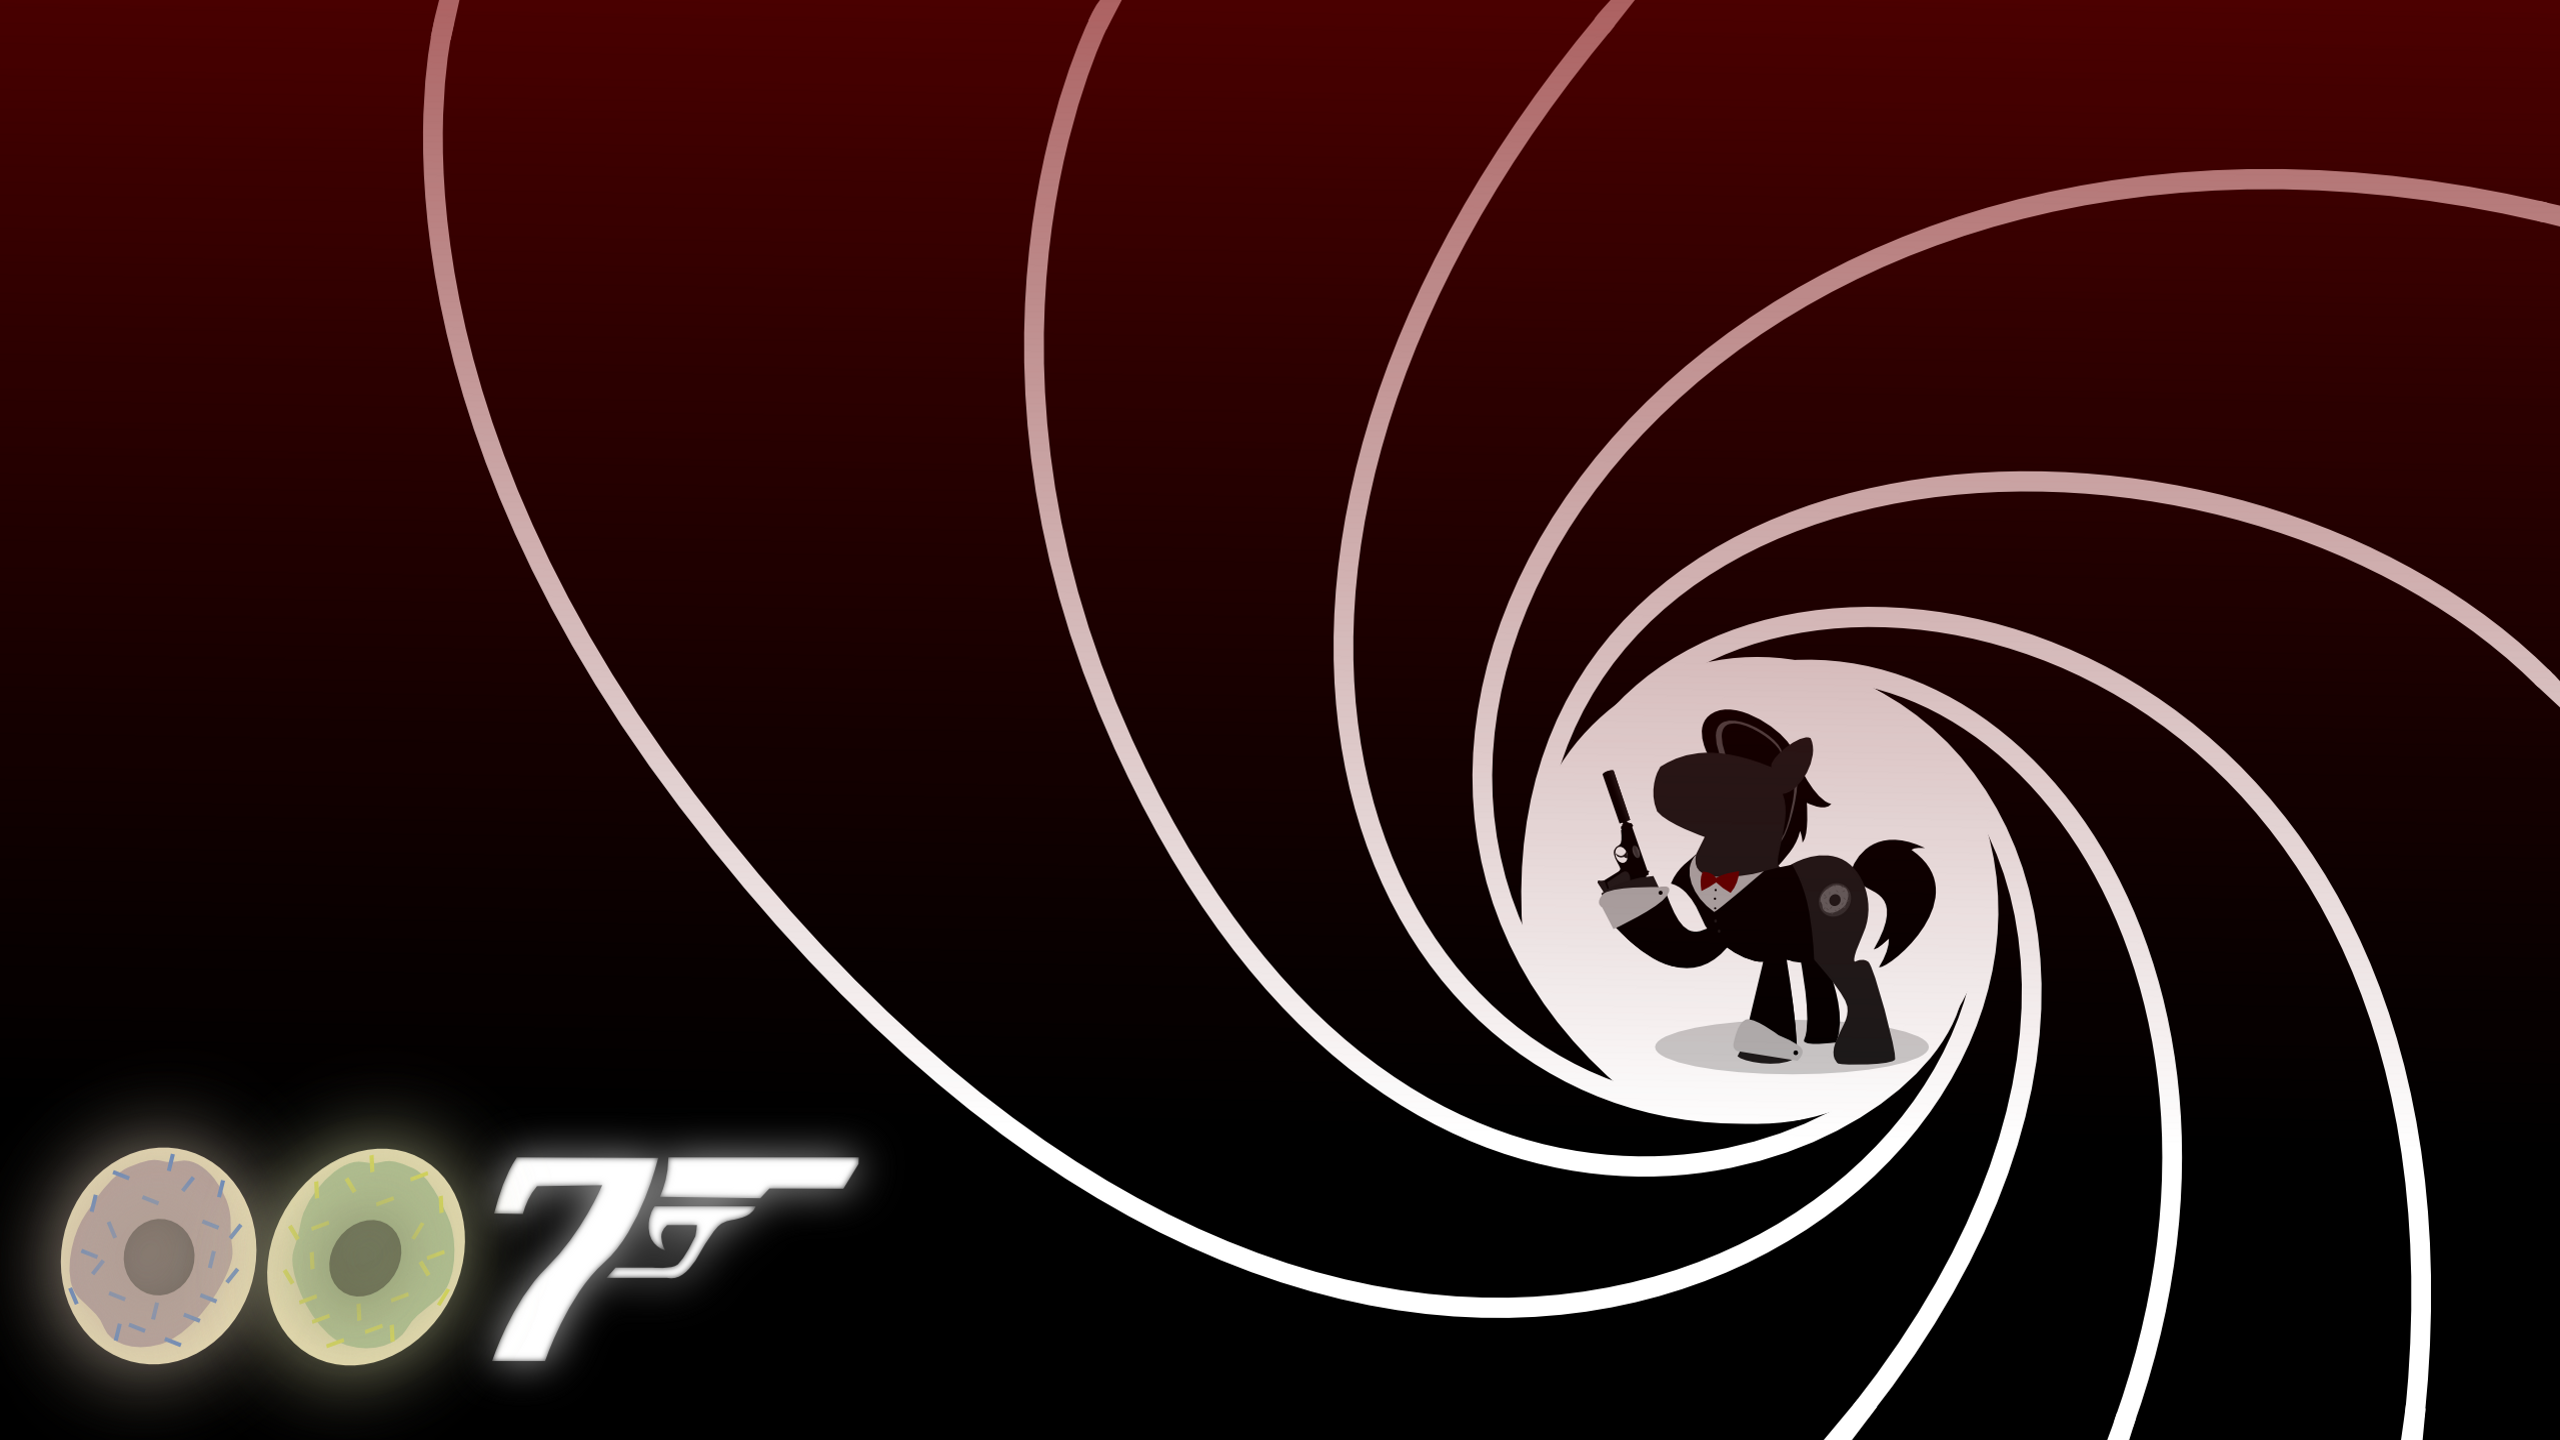 Secret Agent Pony by RegolithX | All wallpapers | My Little Wallpaper -  Wallpapers are Magic